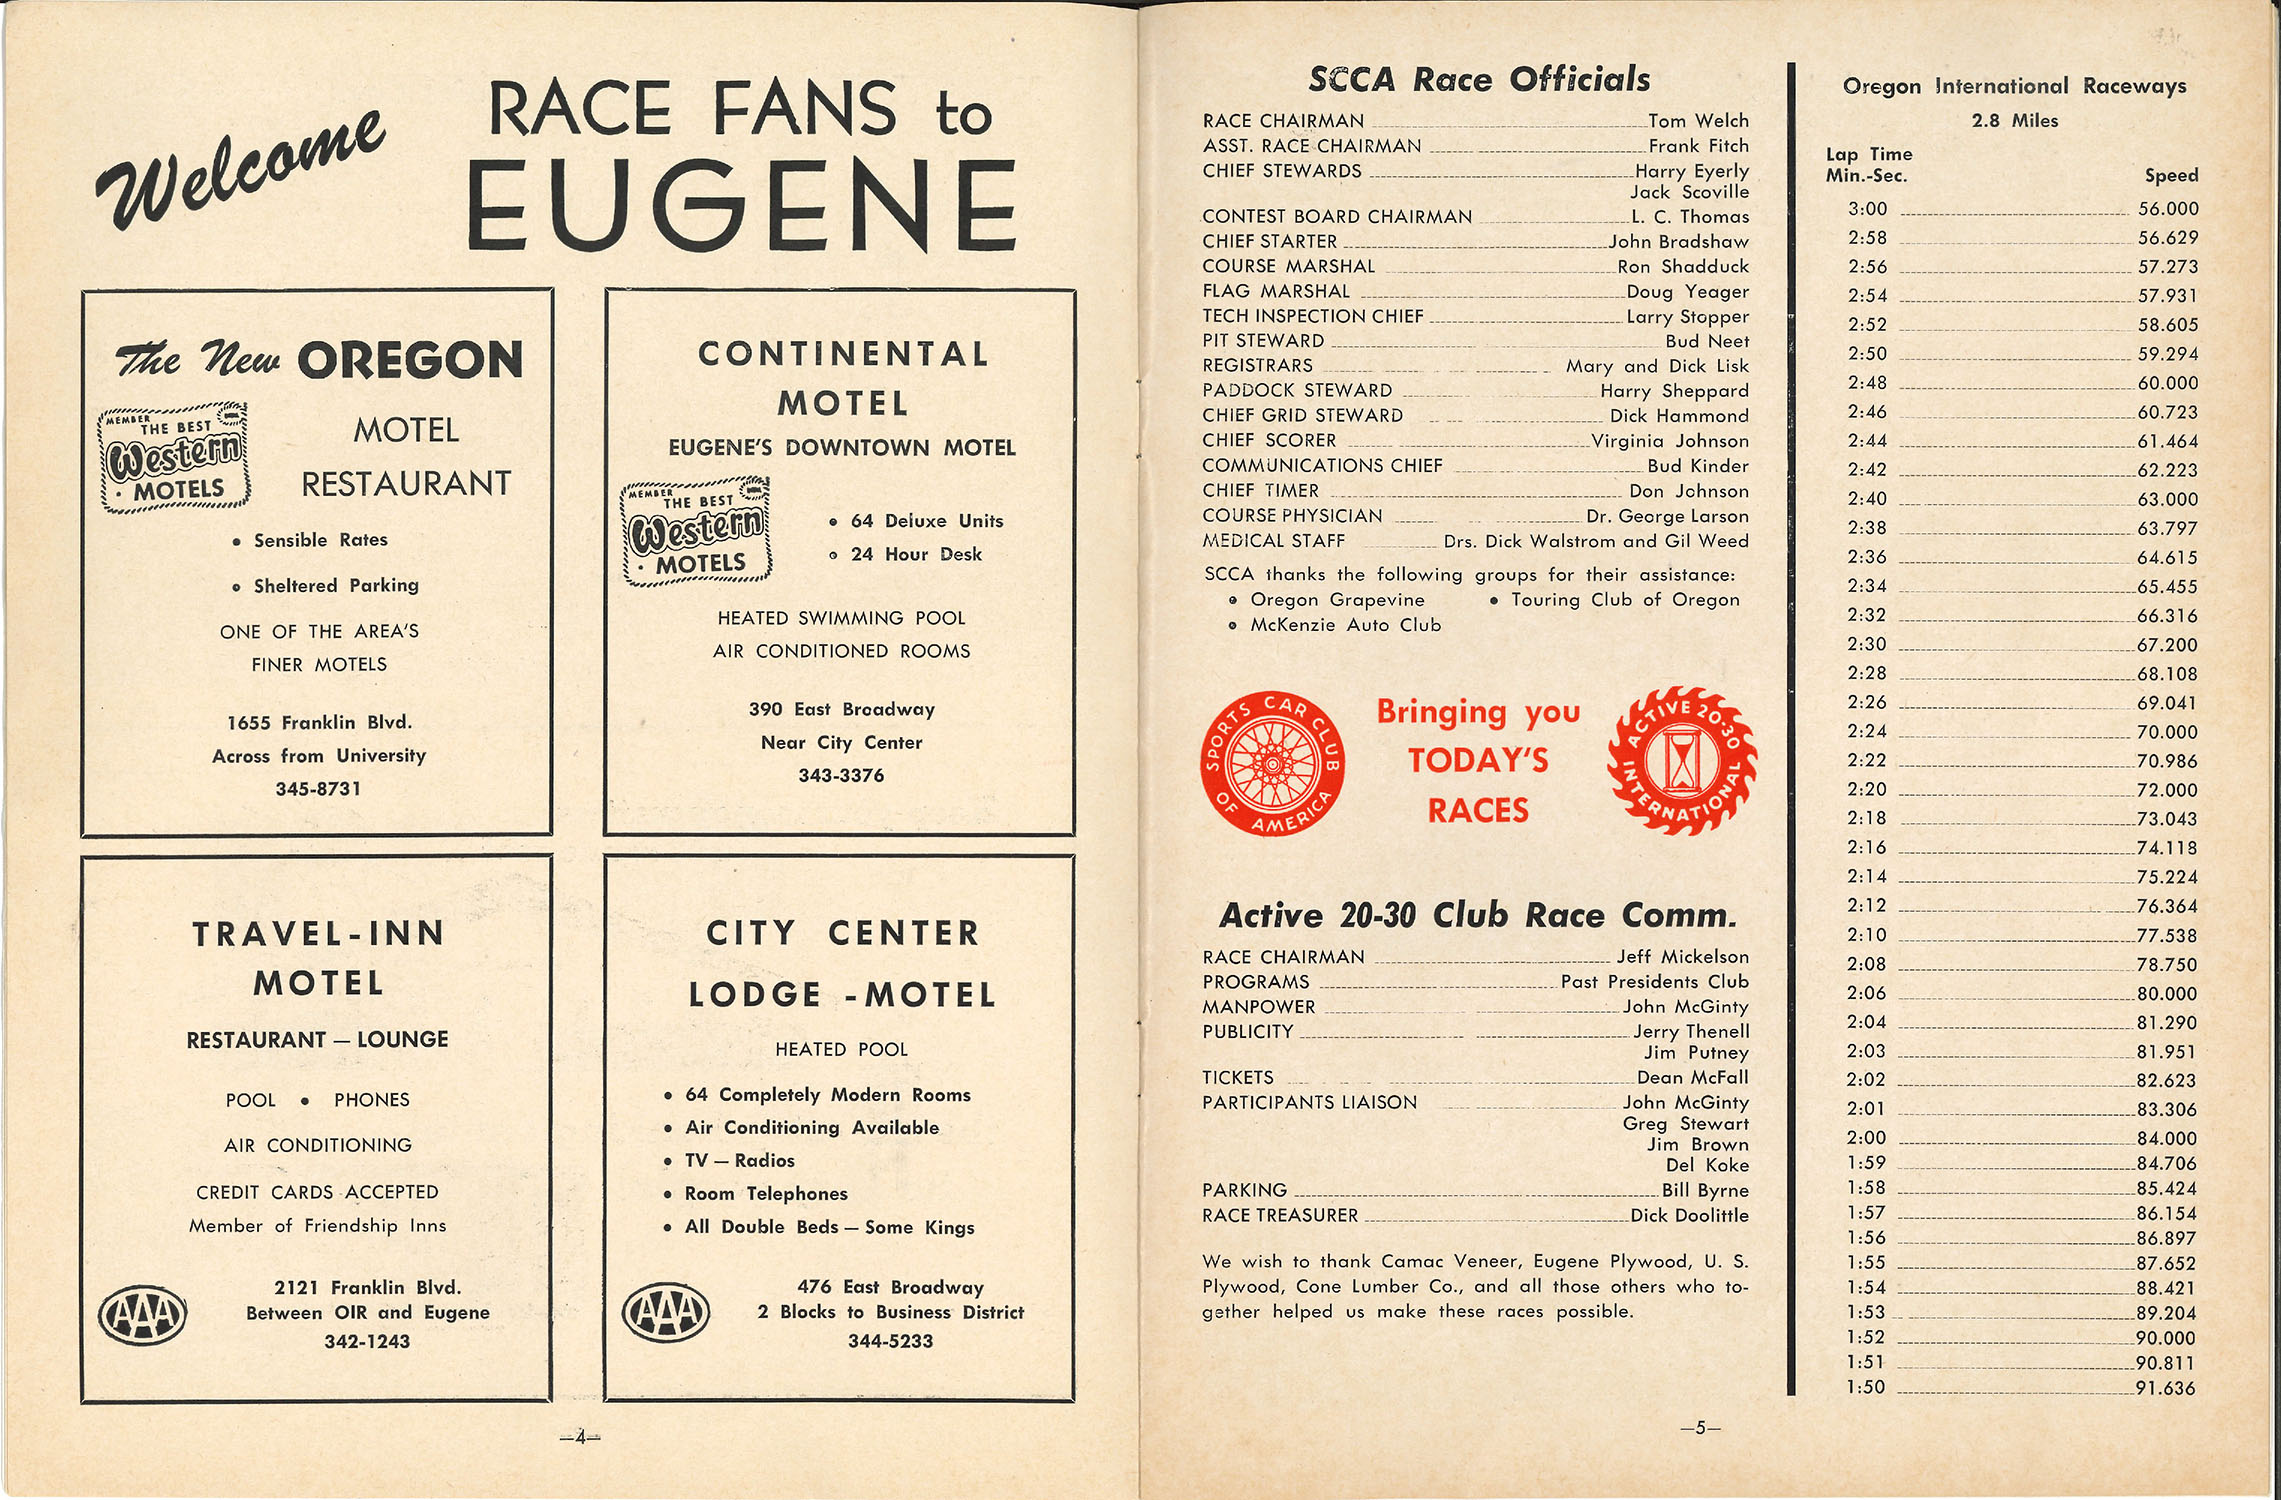 OIR Pamphlet August 1965 with 1965 Race Entry List_Page_04-LR